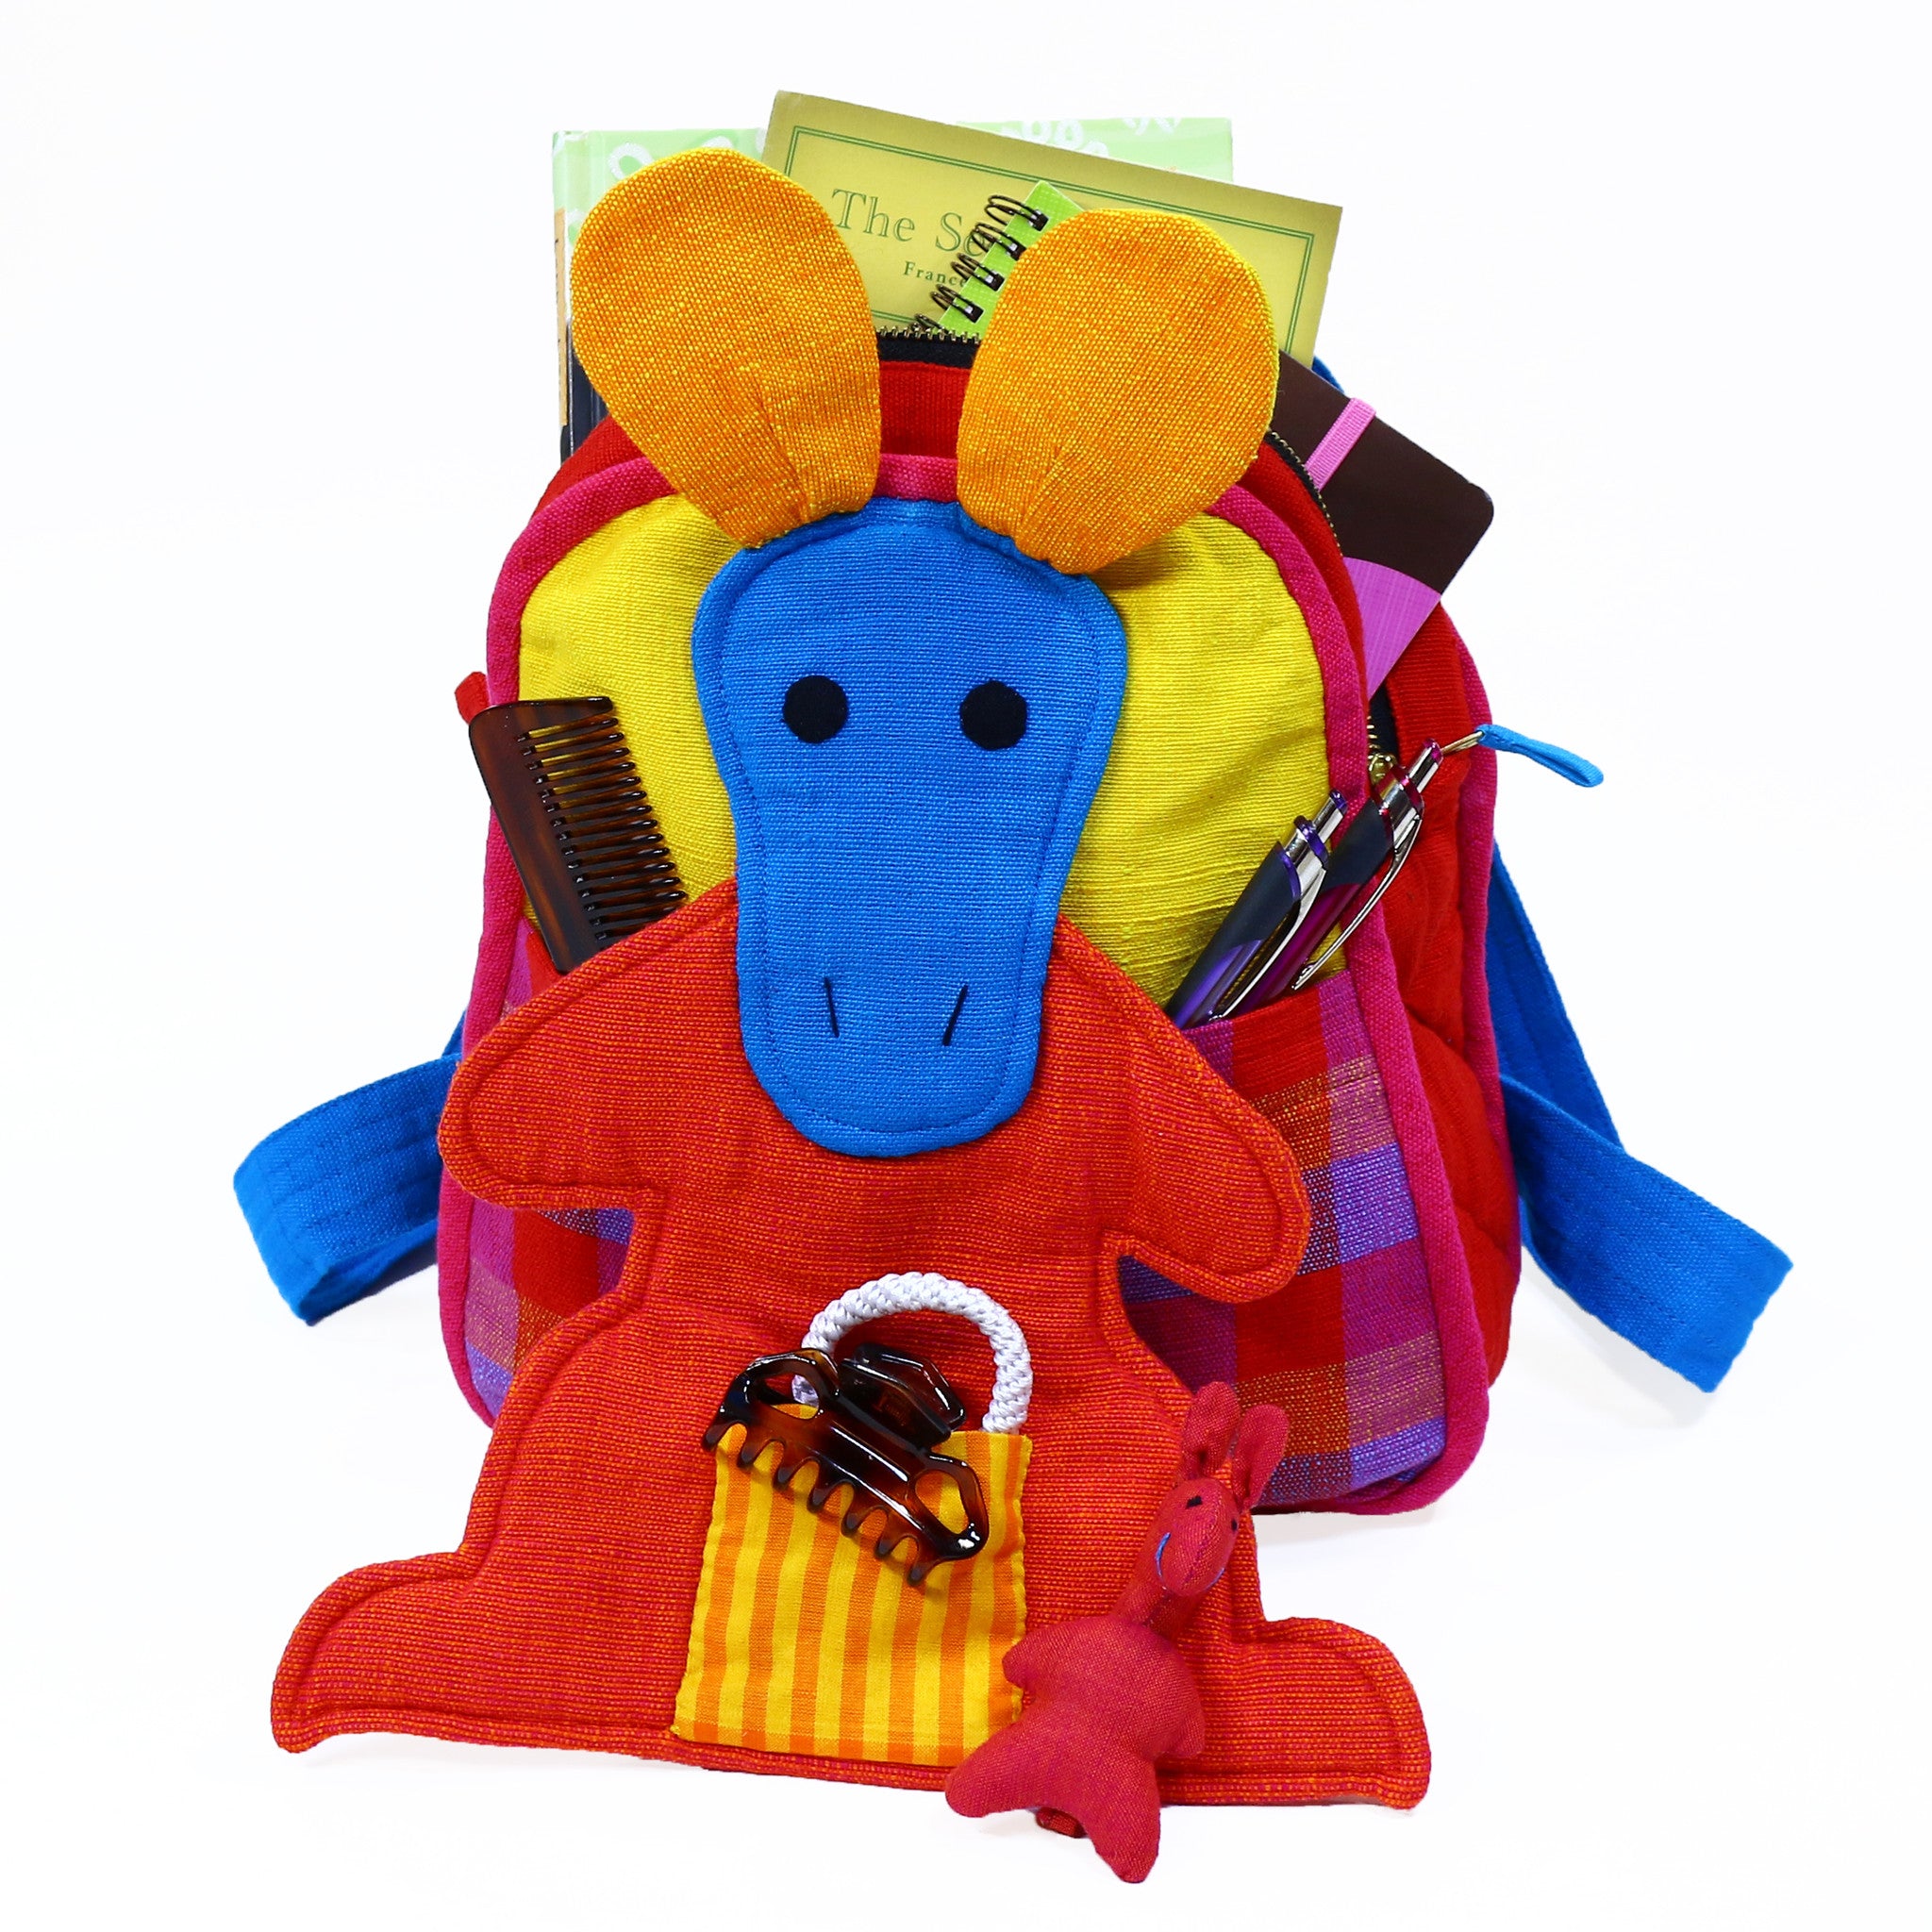 Kangaroo Backpack – very cute and holds a lot!